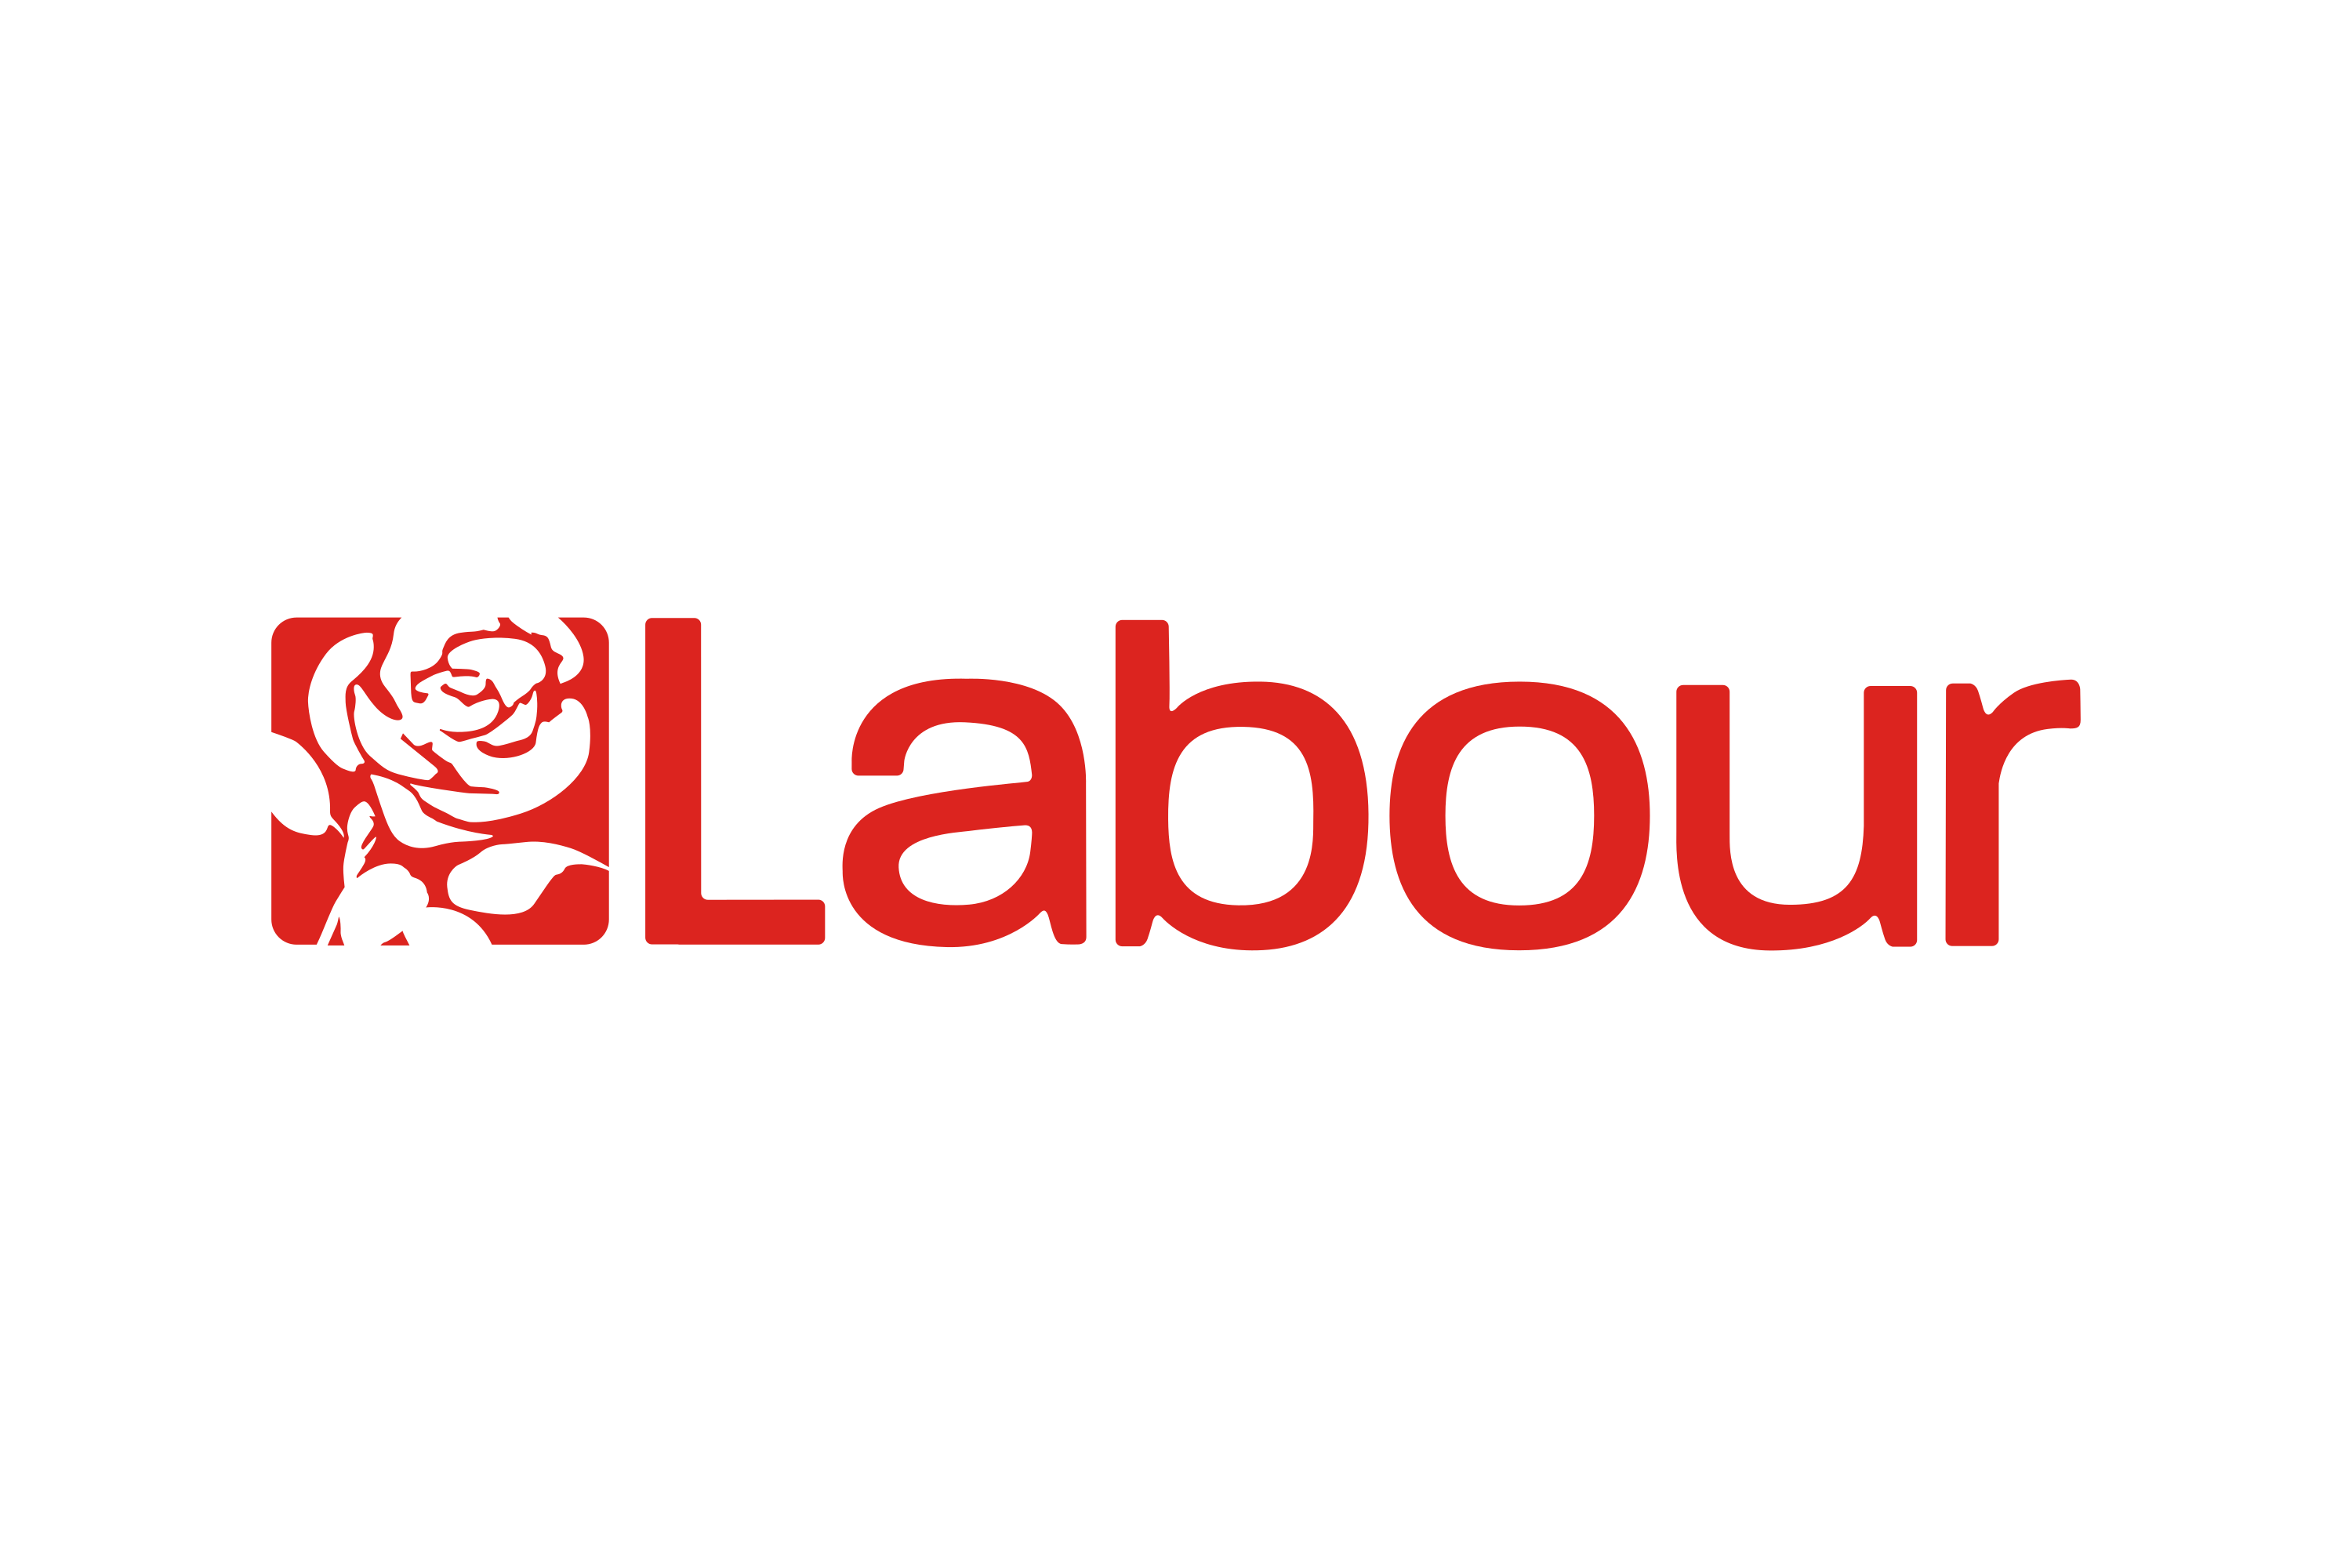 Download Labour Party Logo in SVG Vector or PNG File Format - Logo.wine